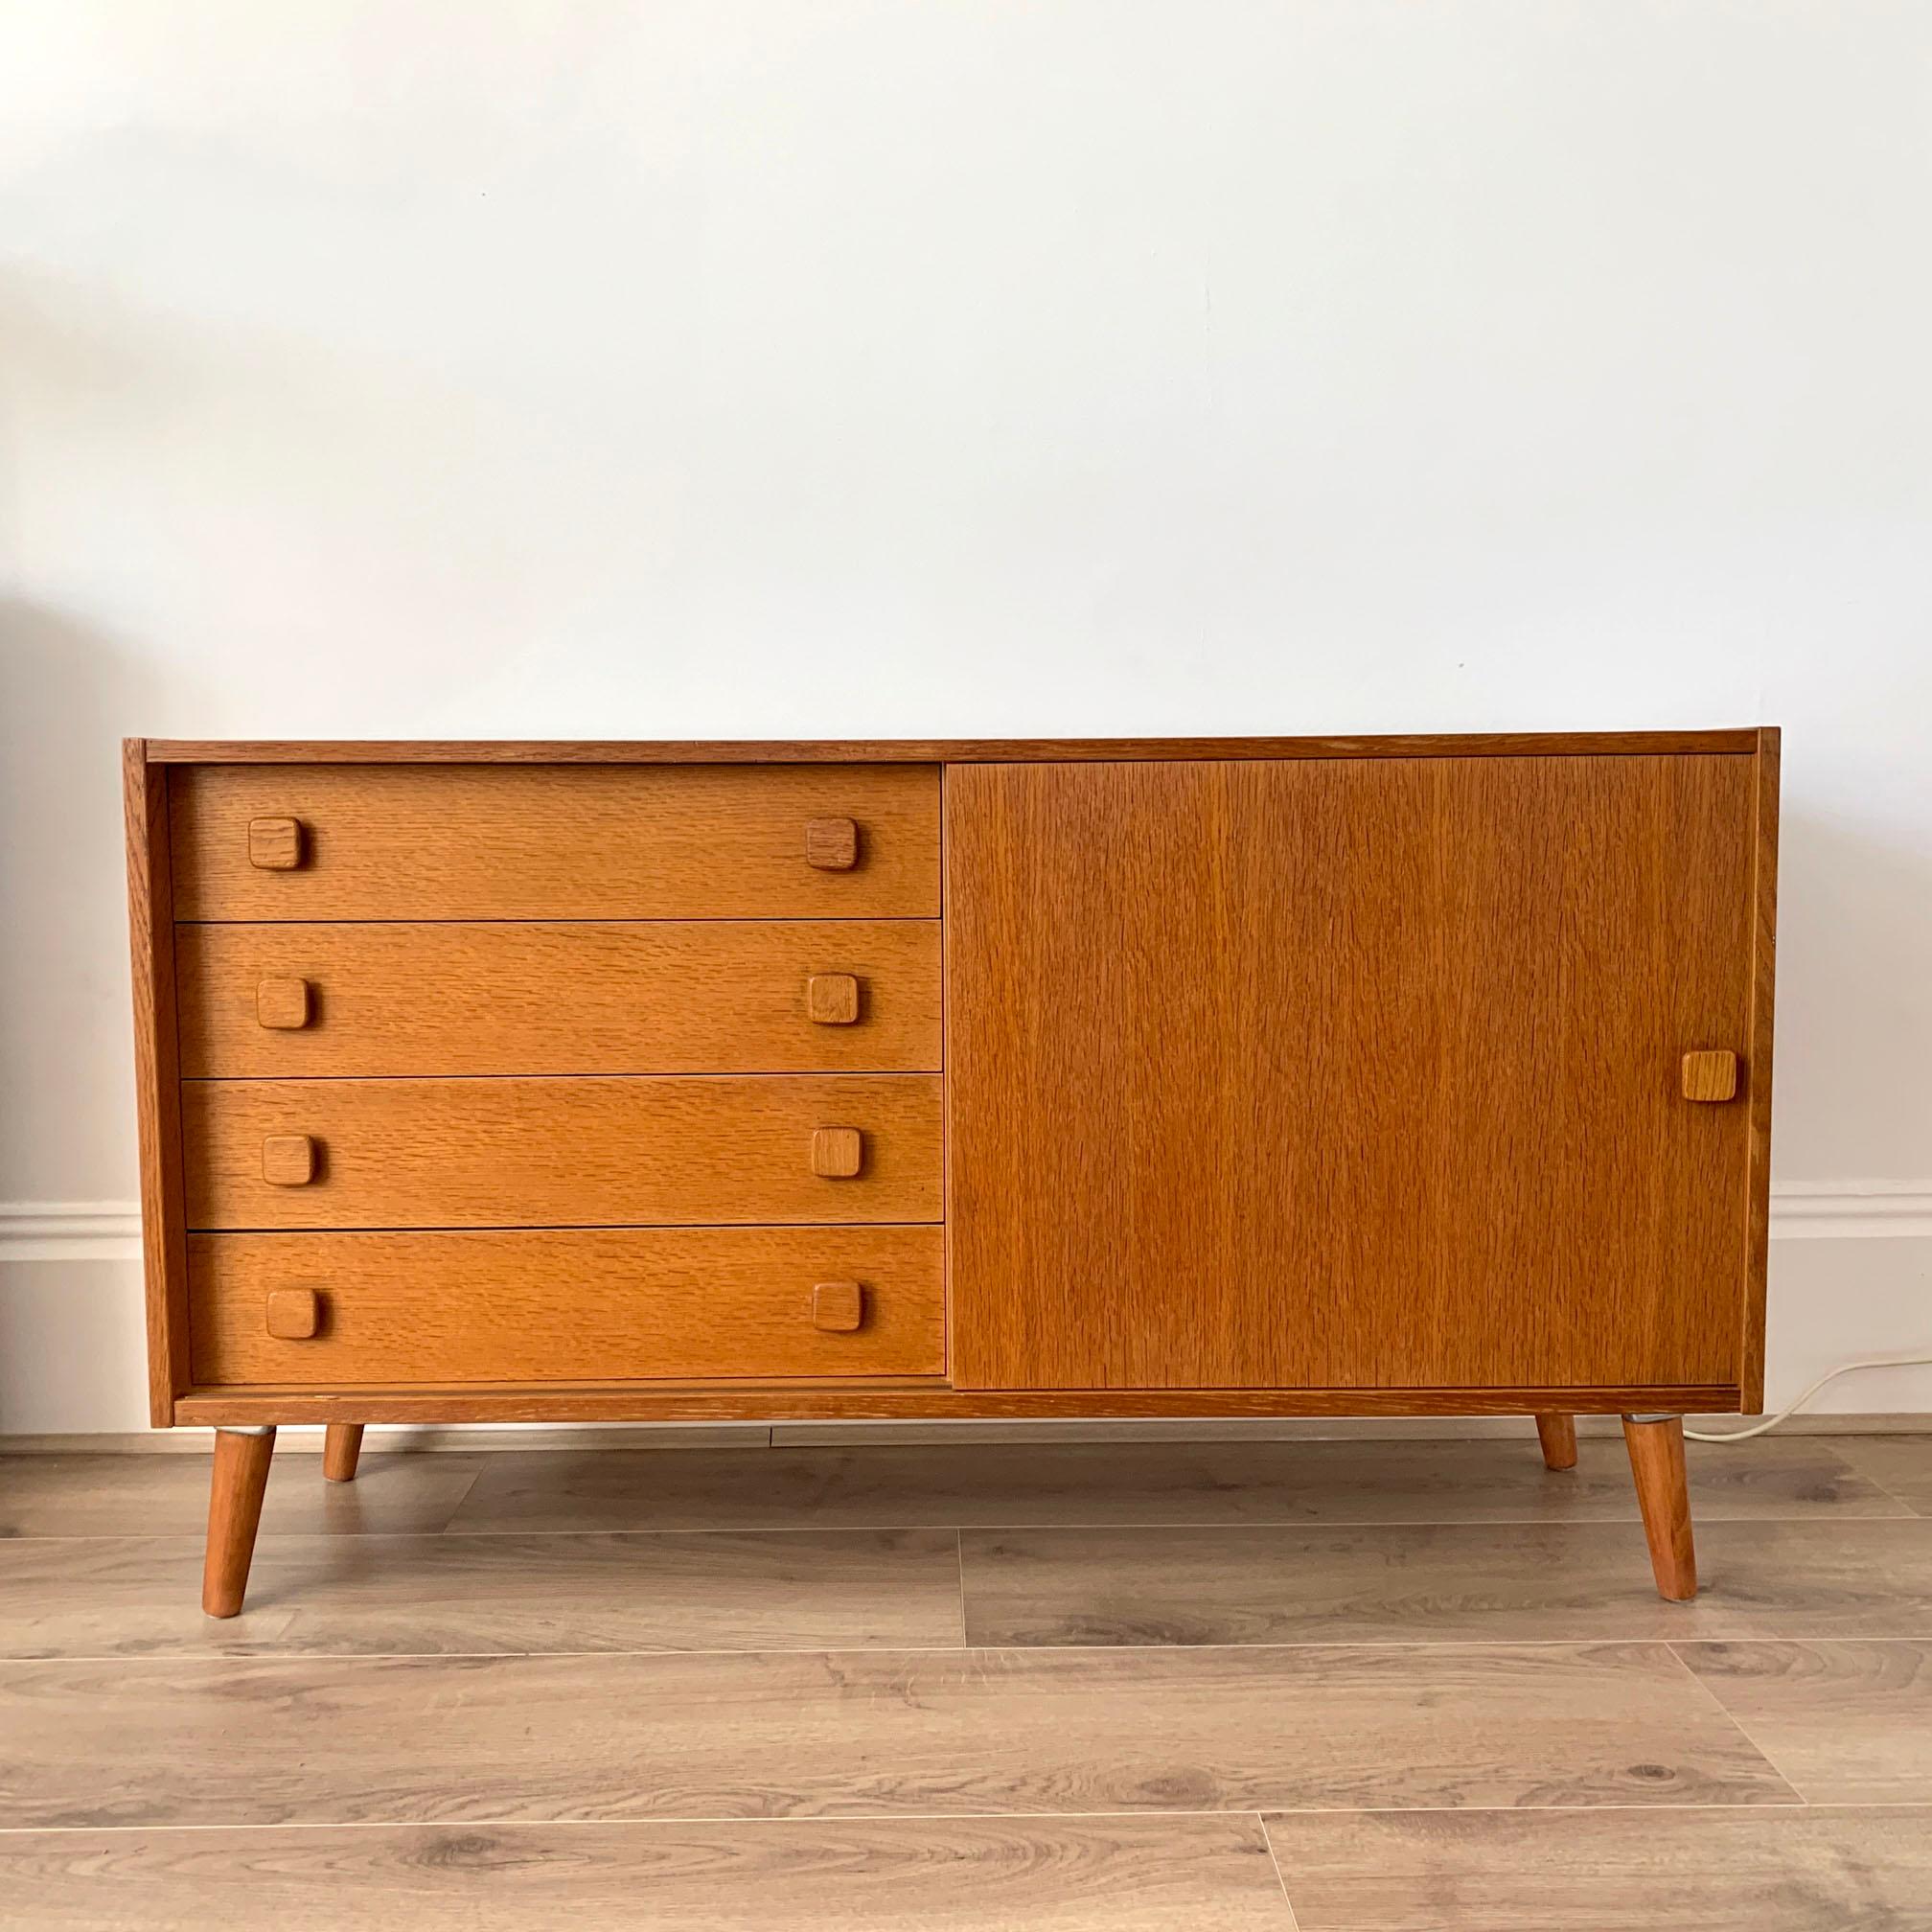 Mobler Compact Credenza

Stylish Compact Danish Credenza by Domino Mobler.

Features four Inset drawers, cabinet with sliding door that slides in front of the drawers.

Small veneer repairs to the bottom of the right hand panel, and there is one